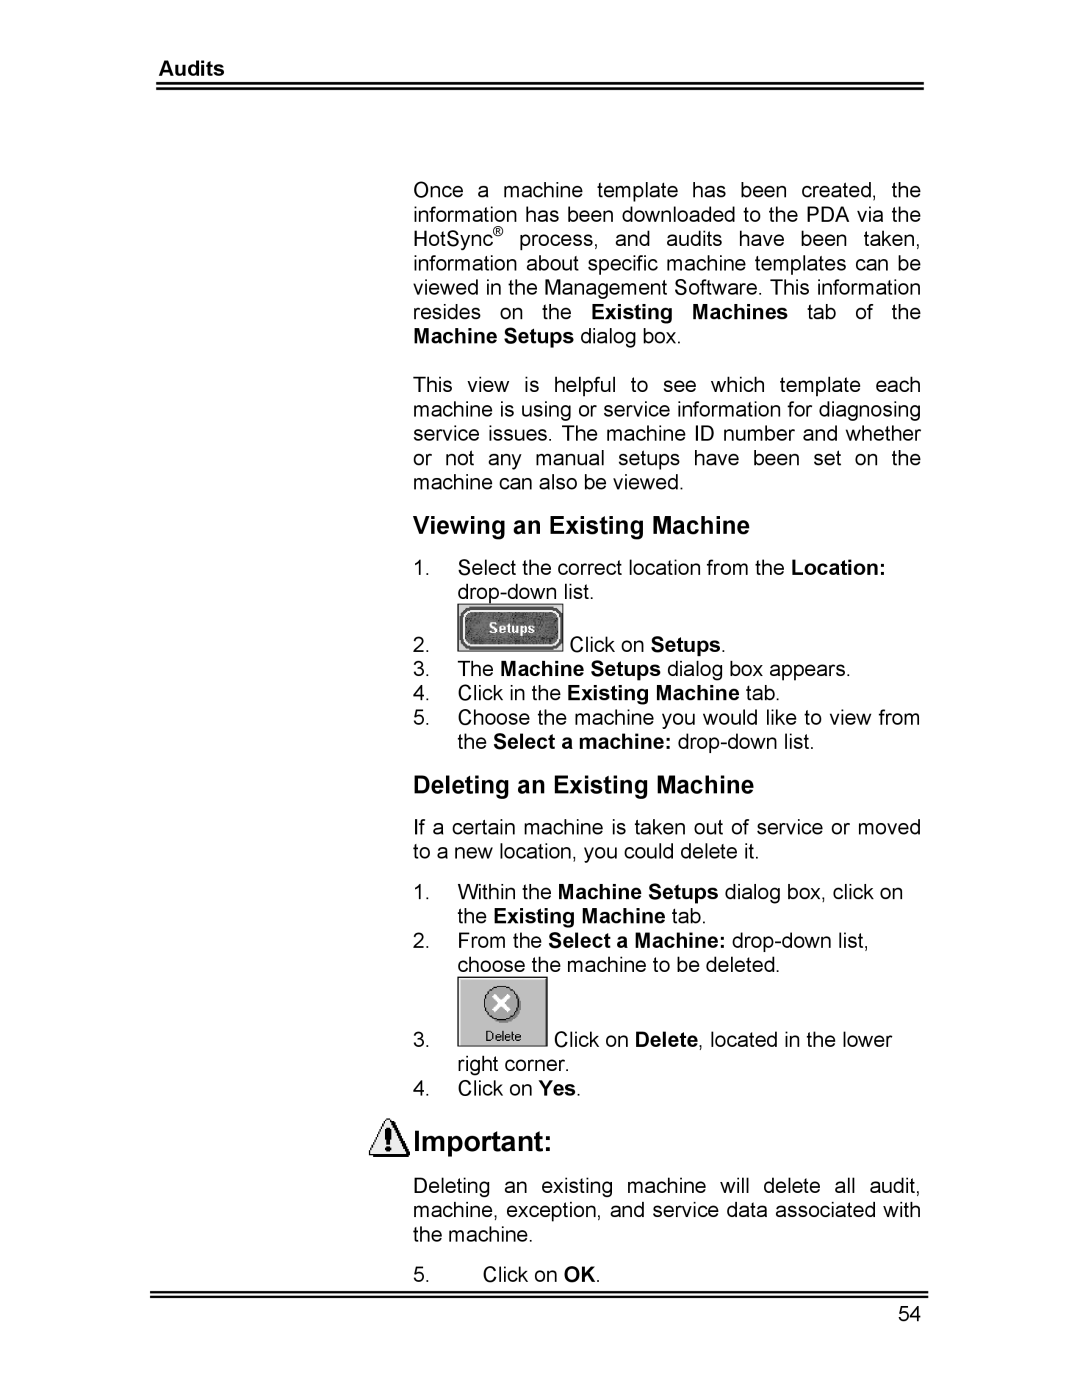 Whirlpool CL-8 user manual Viewing an Existing Machine, Deleting an Existing Machine 